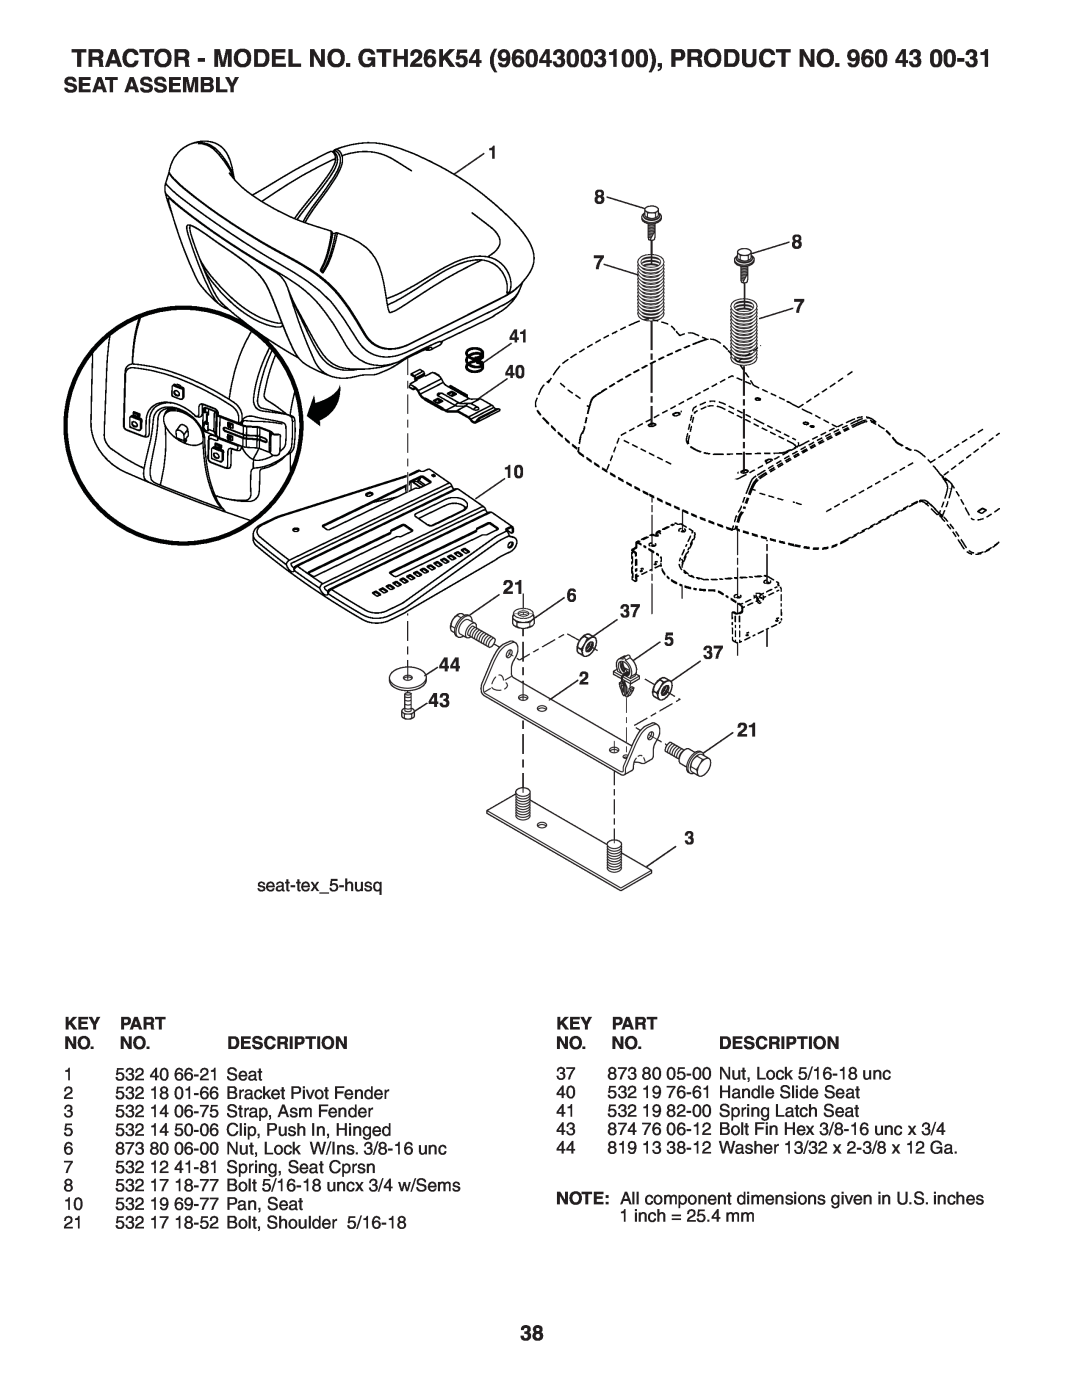 Husqvarna owner manual Seat Assembly, TRACTOR - MODEL NO. GTH26K54 96043003100, PRODUCT NO. 960 43 